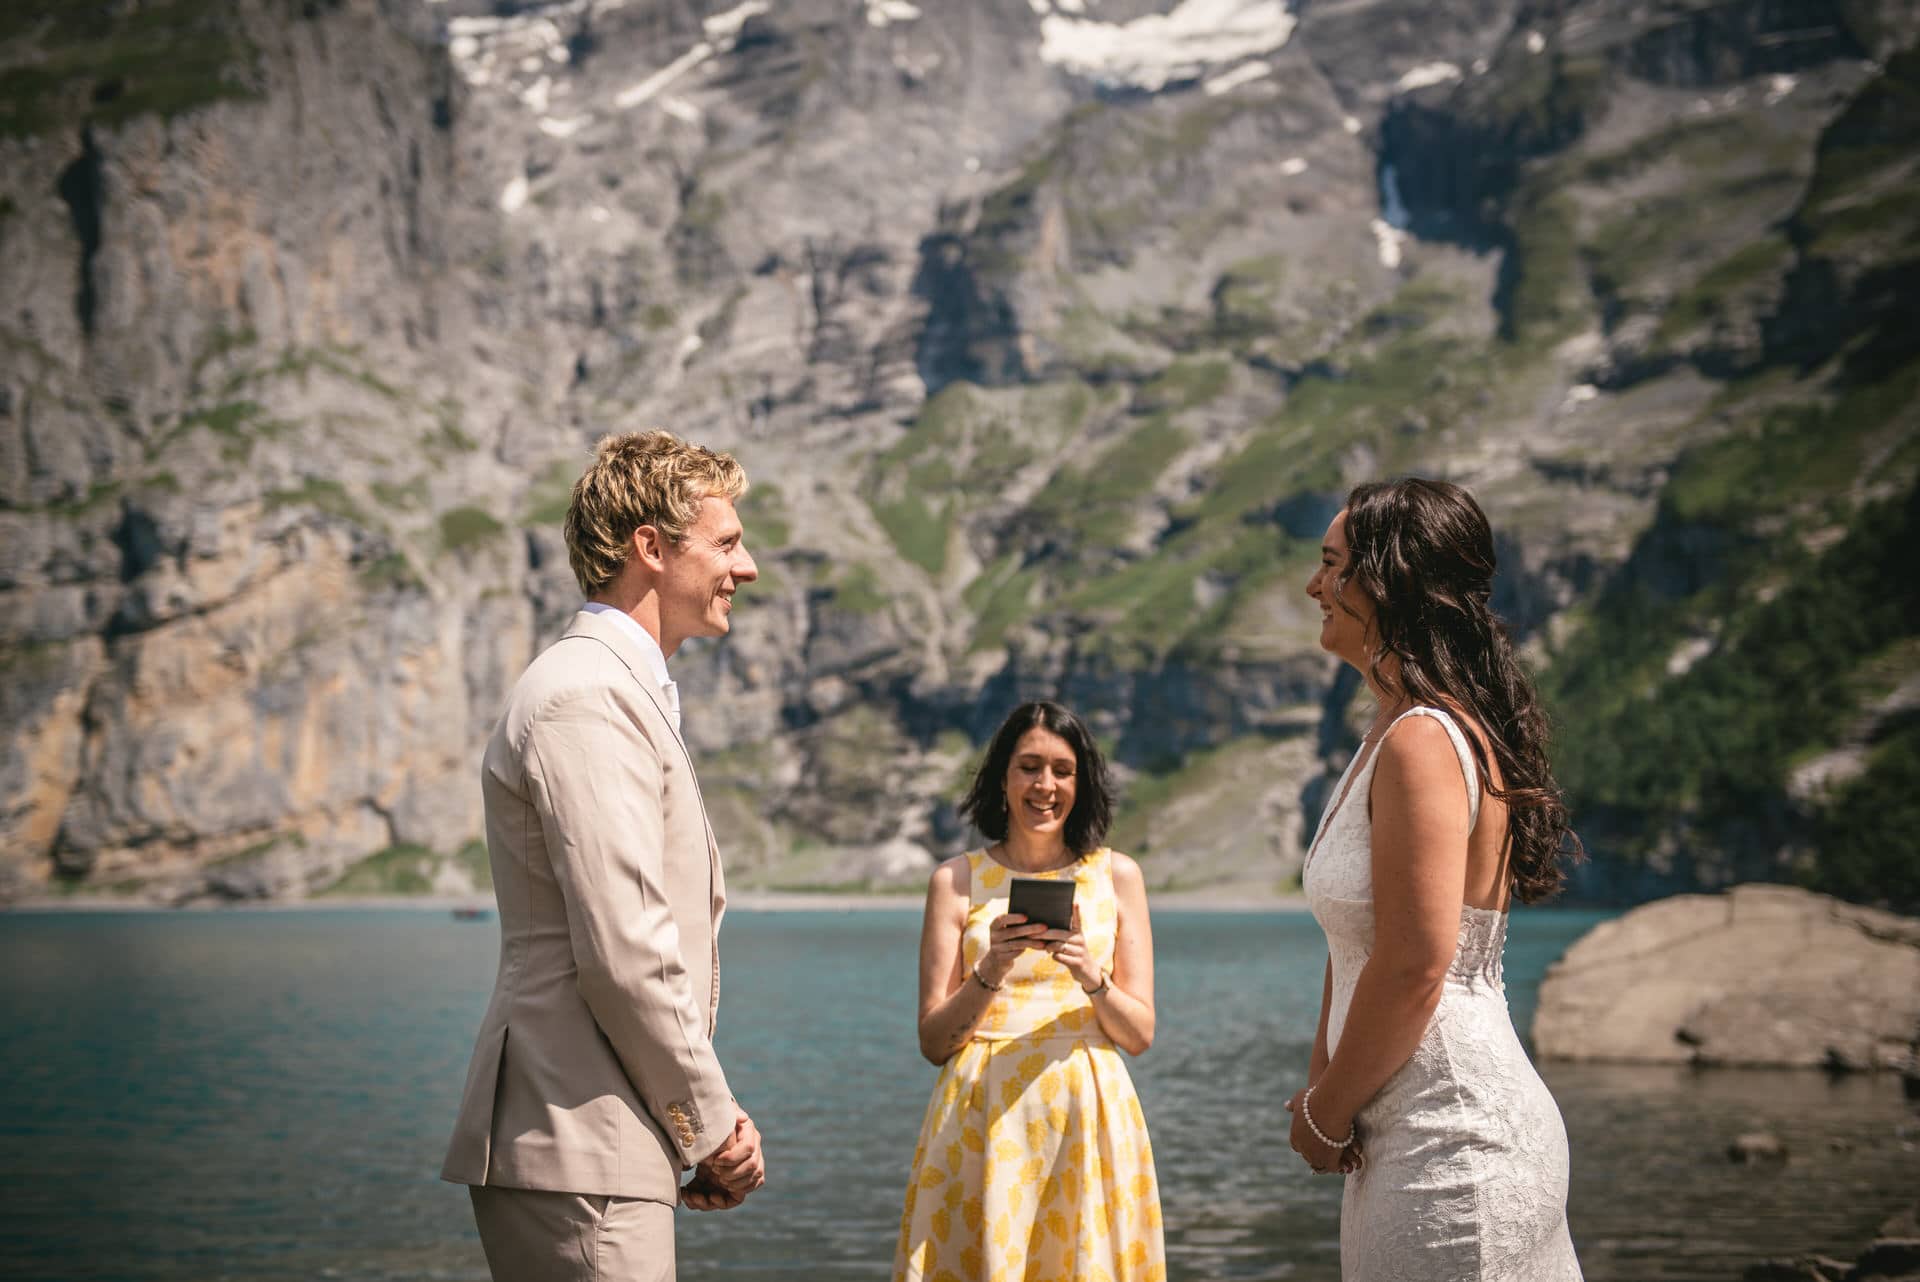 Peaks echoed their love story - a captivating hiking elopement.